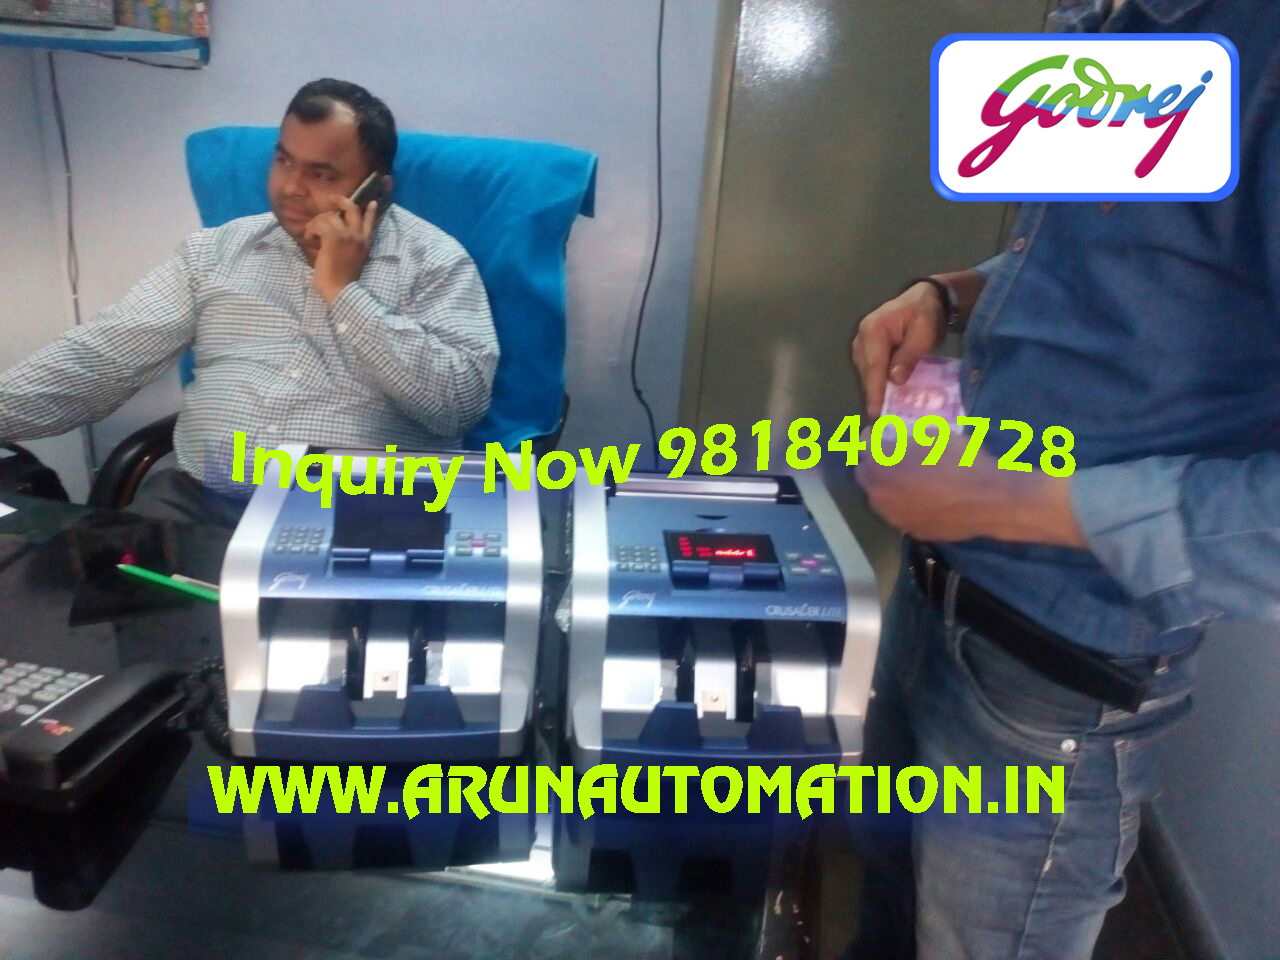 Currency (Note) Counting Machine Dealers in PitampuraOtherAnnouncementsNorth DelhiPitampura